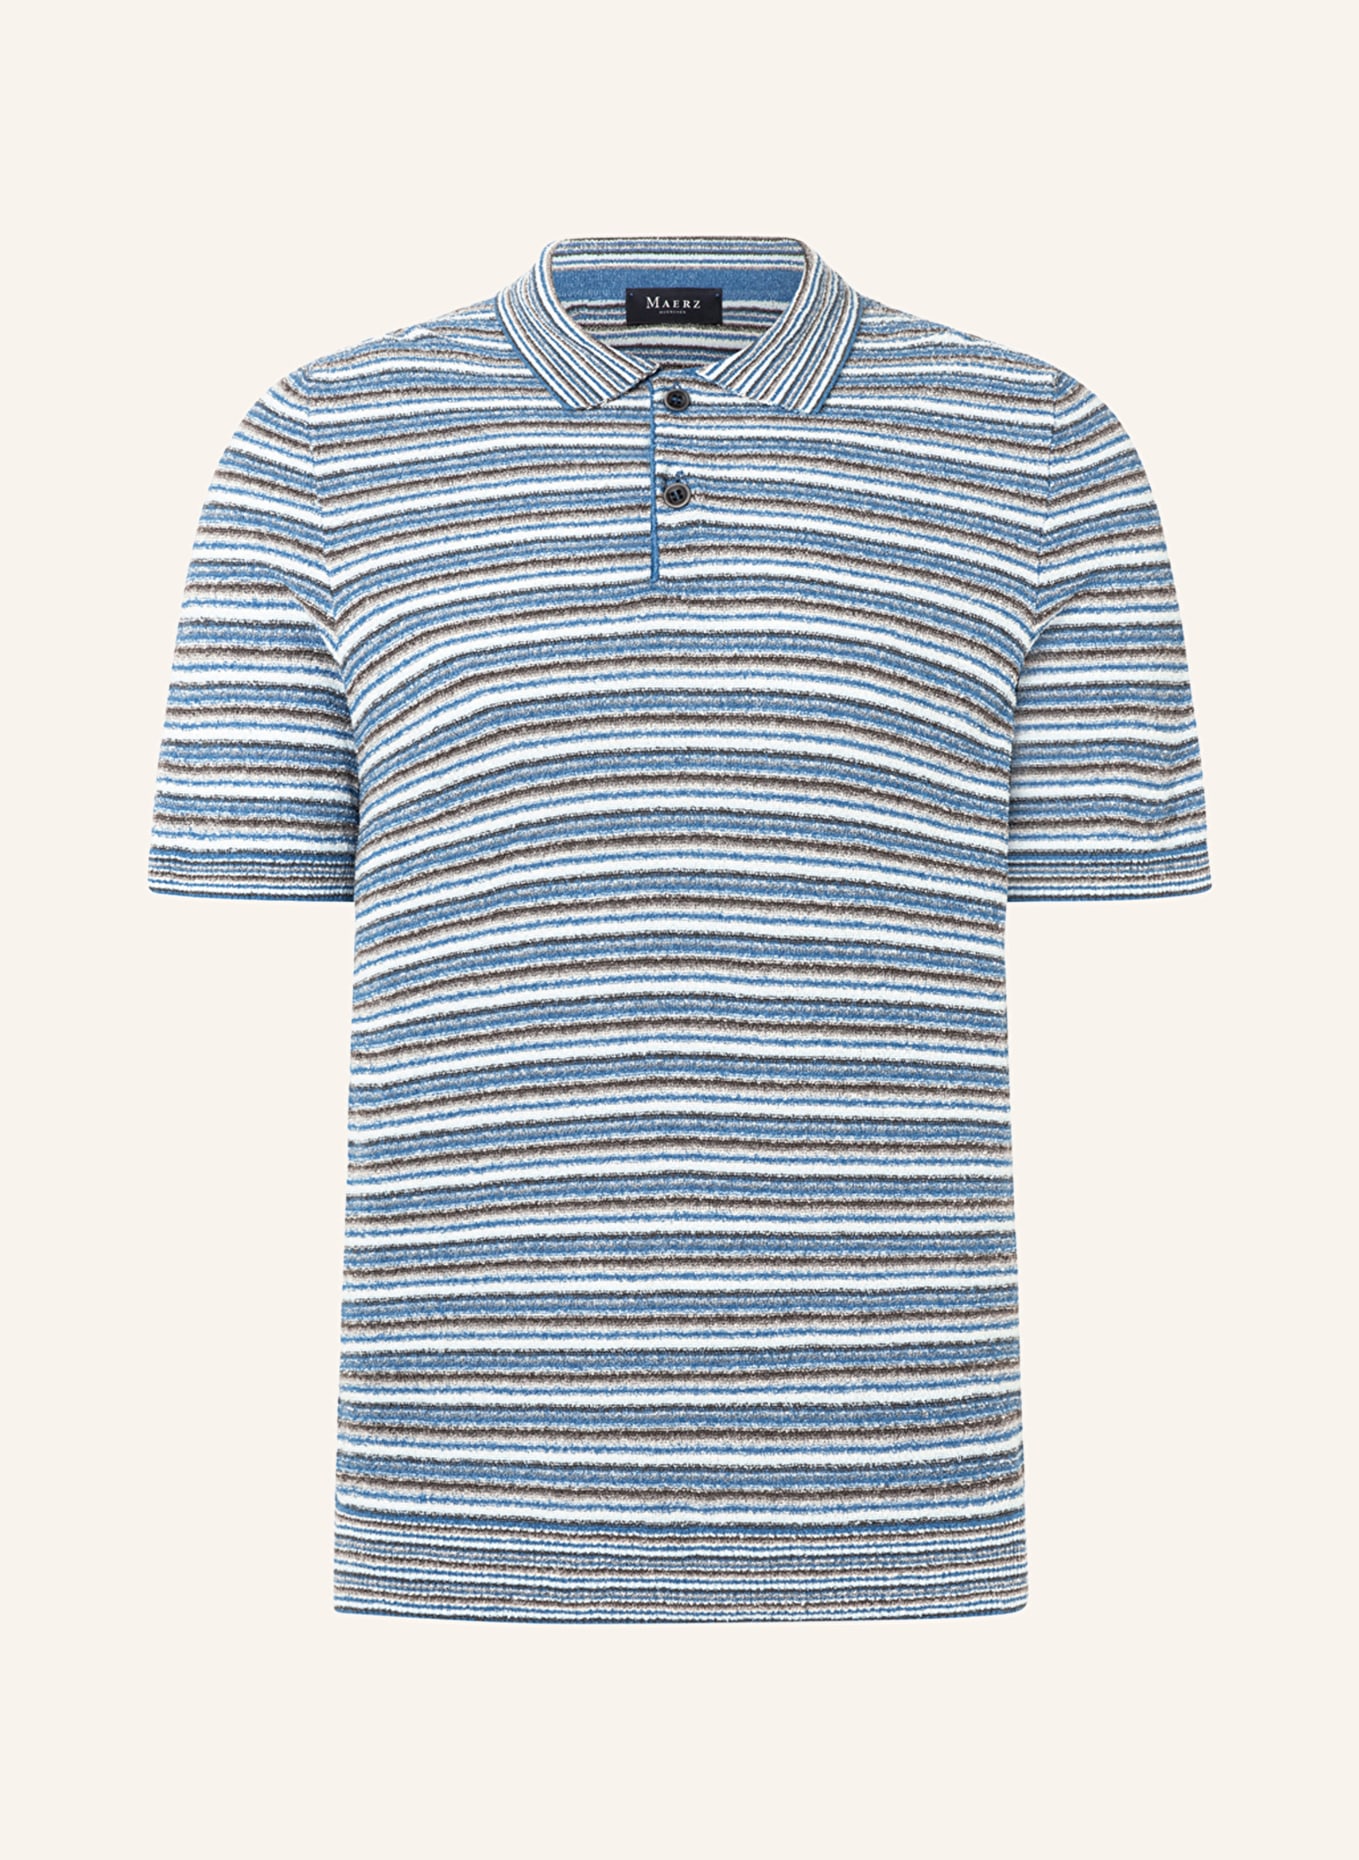 MAERZ MUENCHEN Knitted polo shirt, Color: LIGHT BLUE/ WHITE/ DARK GRAY (Image 1)